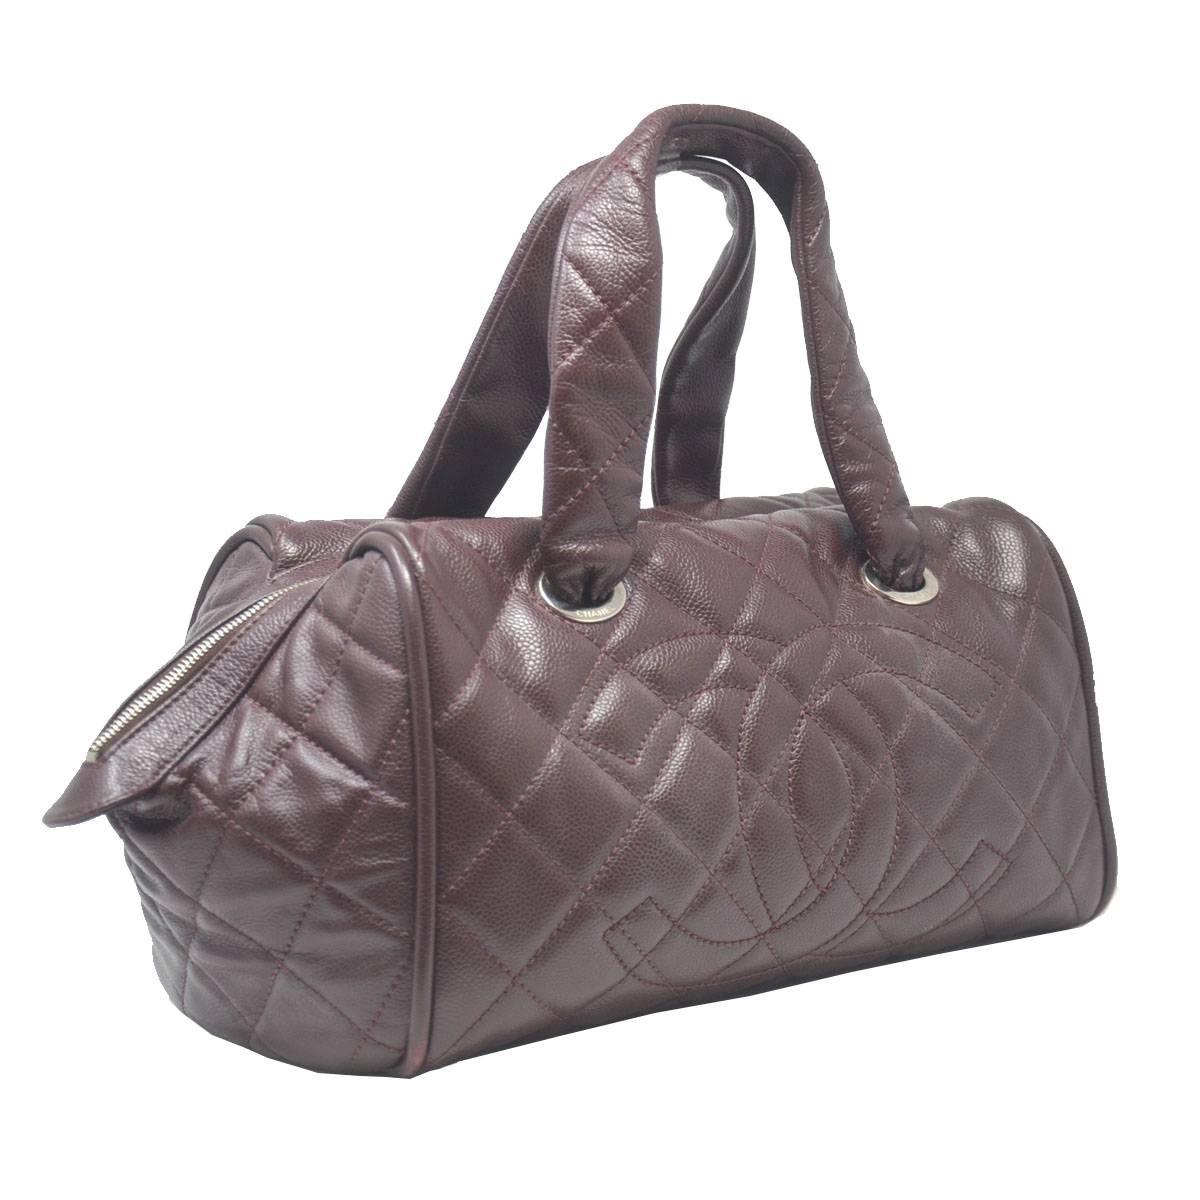 Company-Chanel
Model-Large Stachel
Color-Burgundy 
Date Code-Tag fell off 
Material-Leather
Measurements-13.5